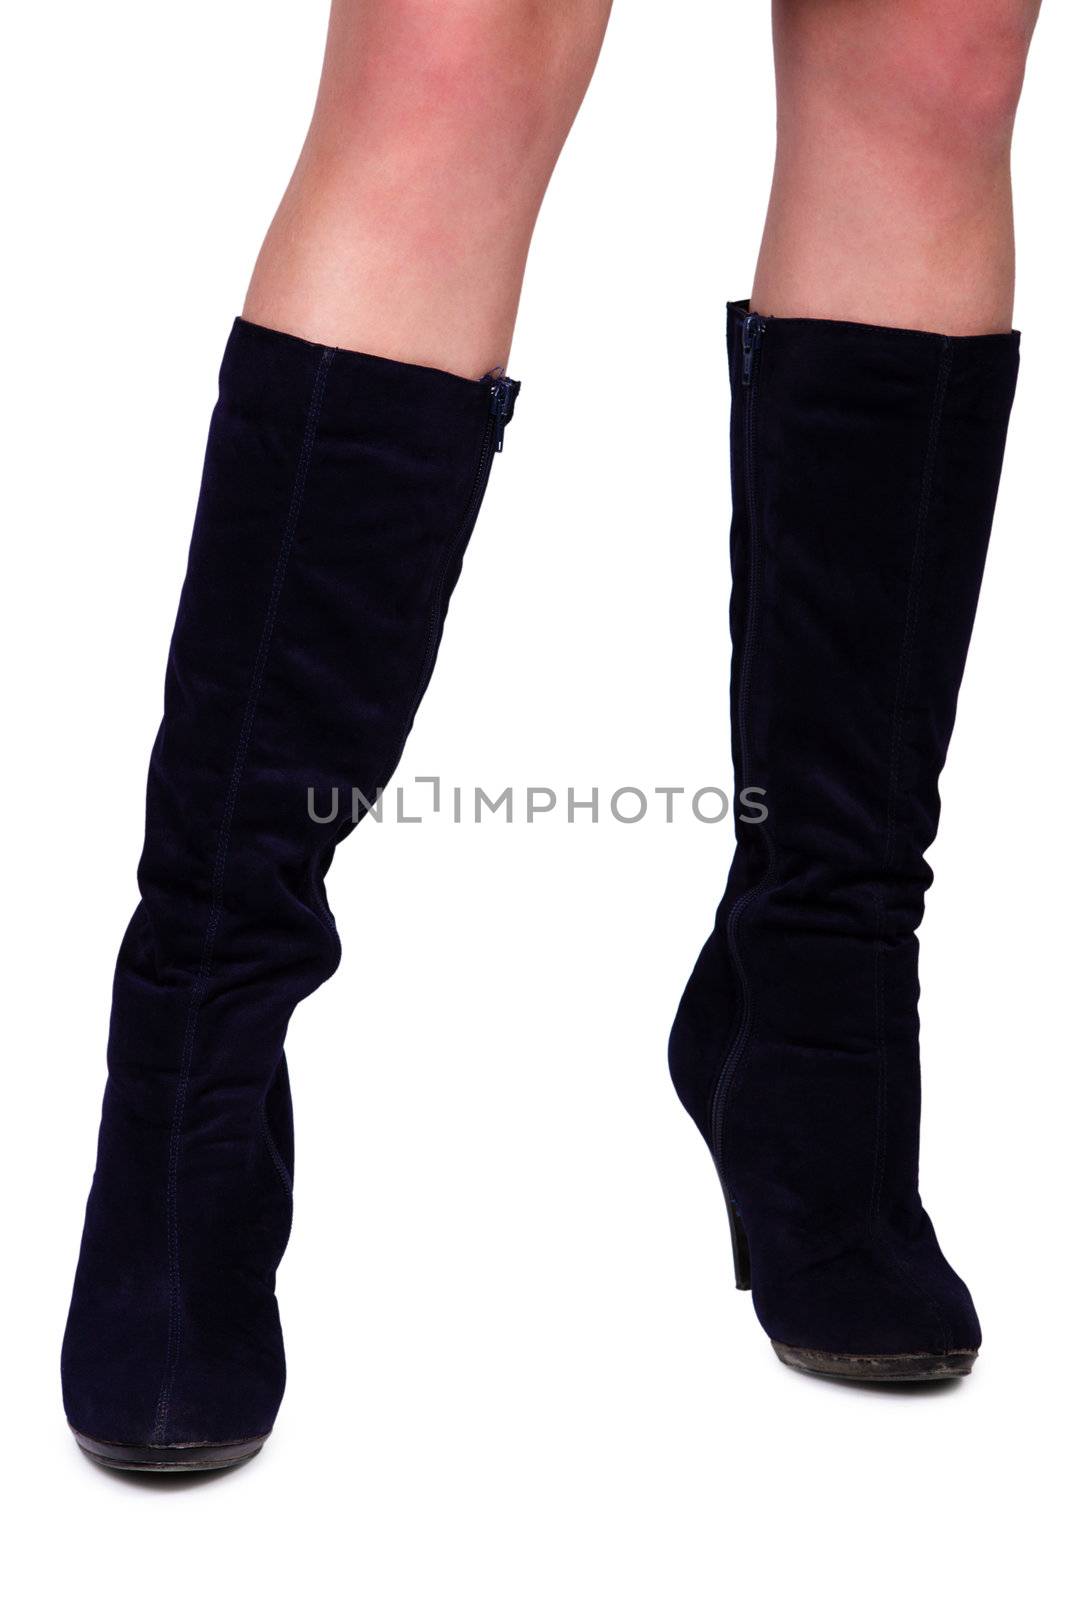 Slender female legs in black suede boots. Isolated over white background.